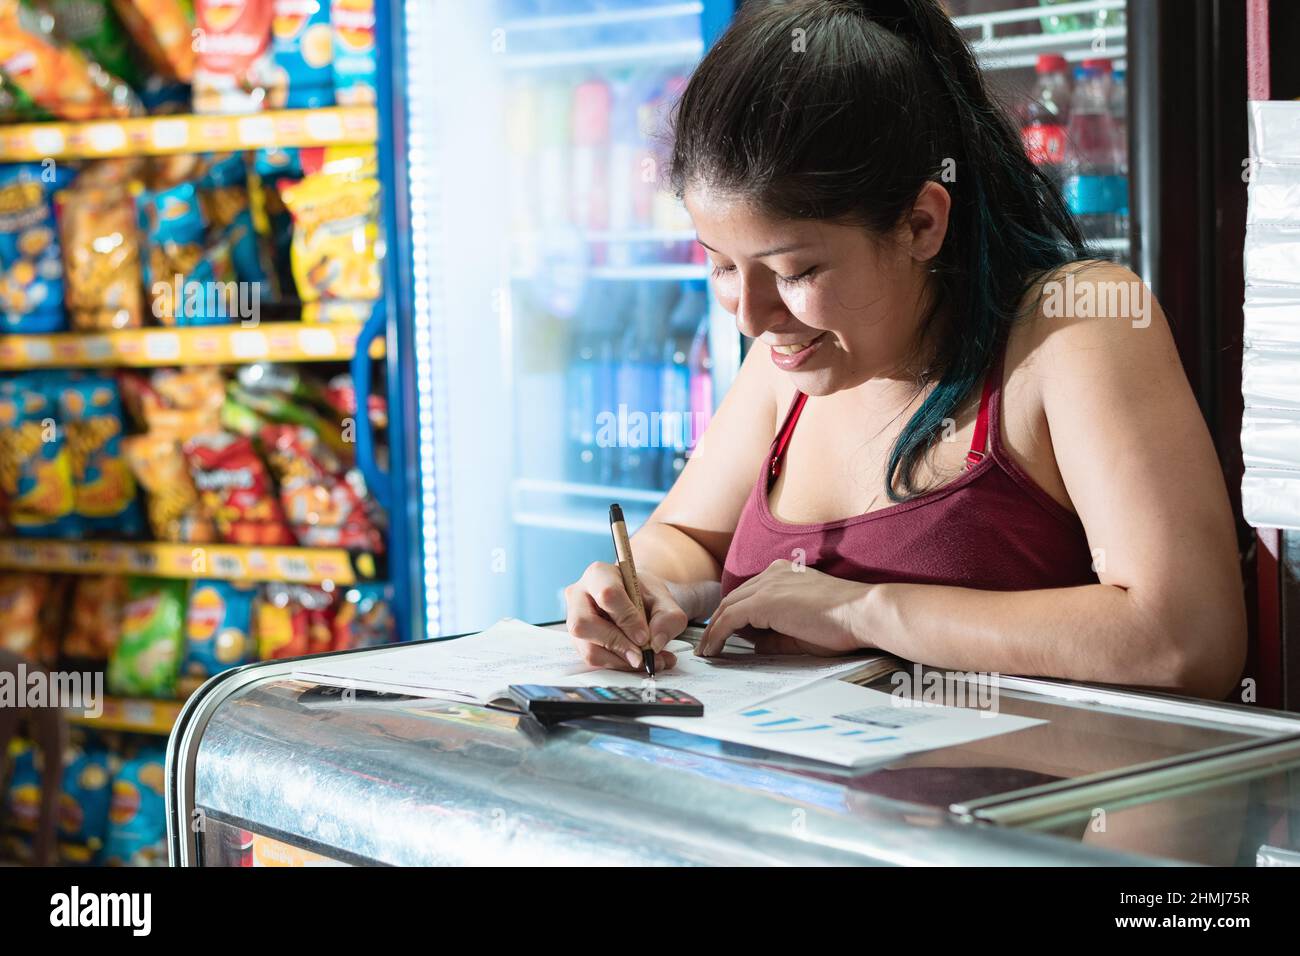 beautiful latin woman smiling very happy, writing in her notebook the excellent performance of her grocery store, girl leaning on glass display case v Stock Photo